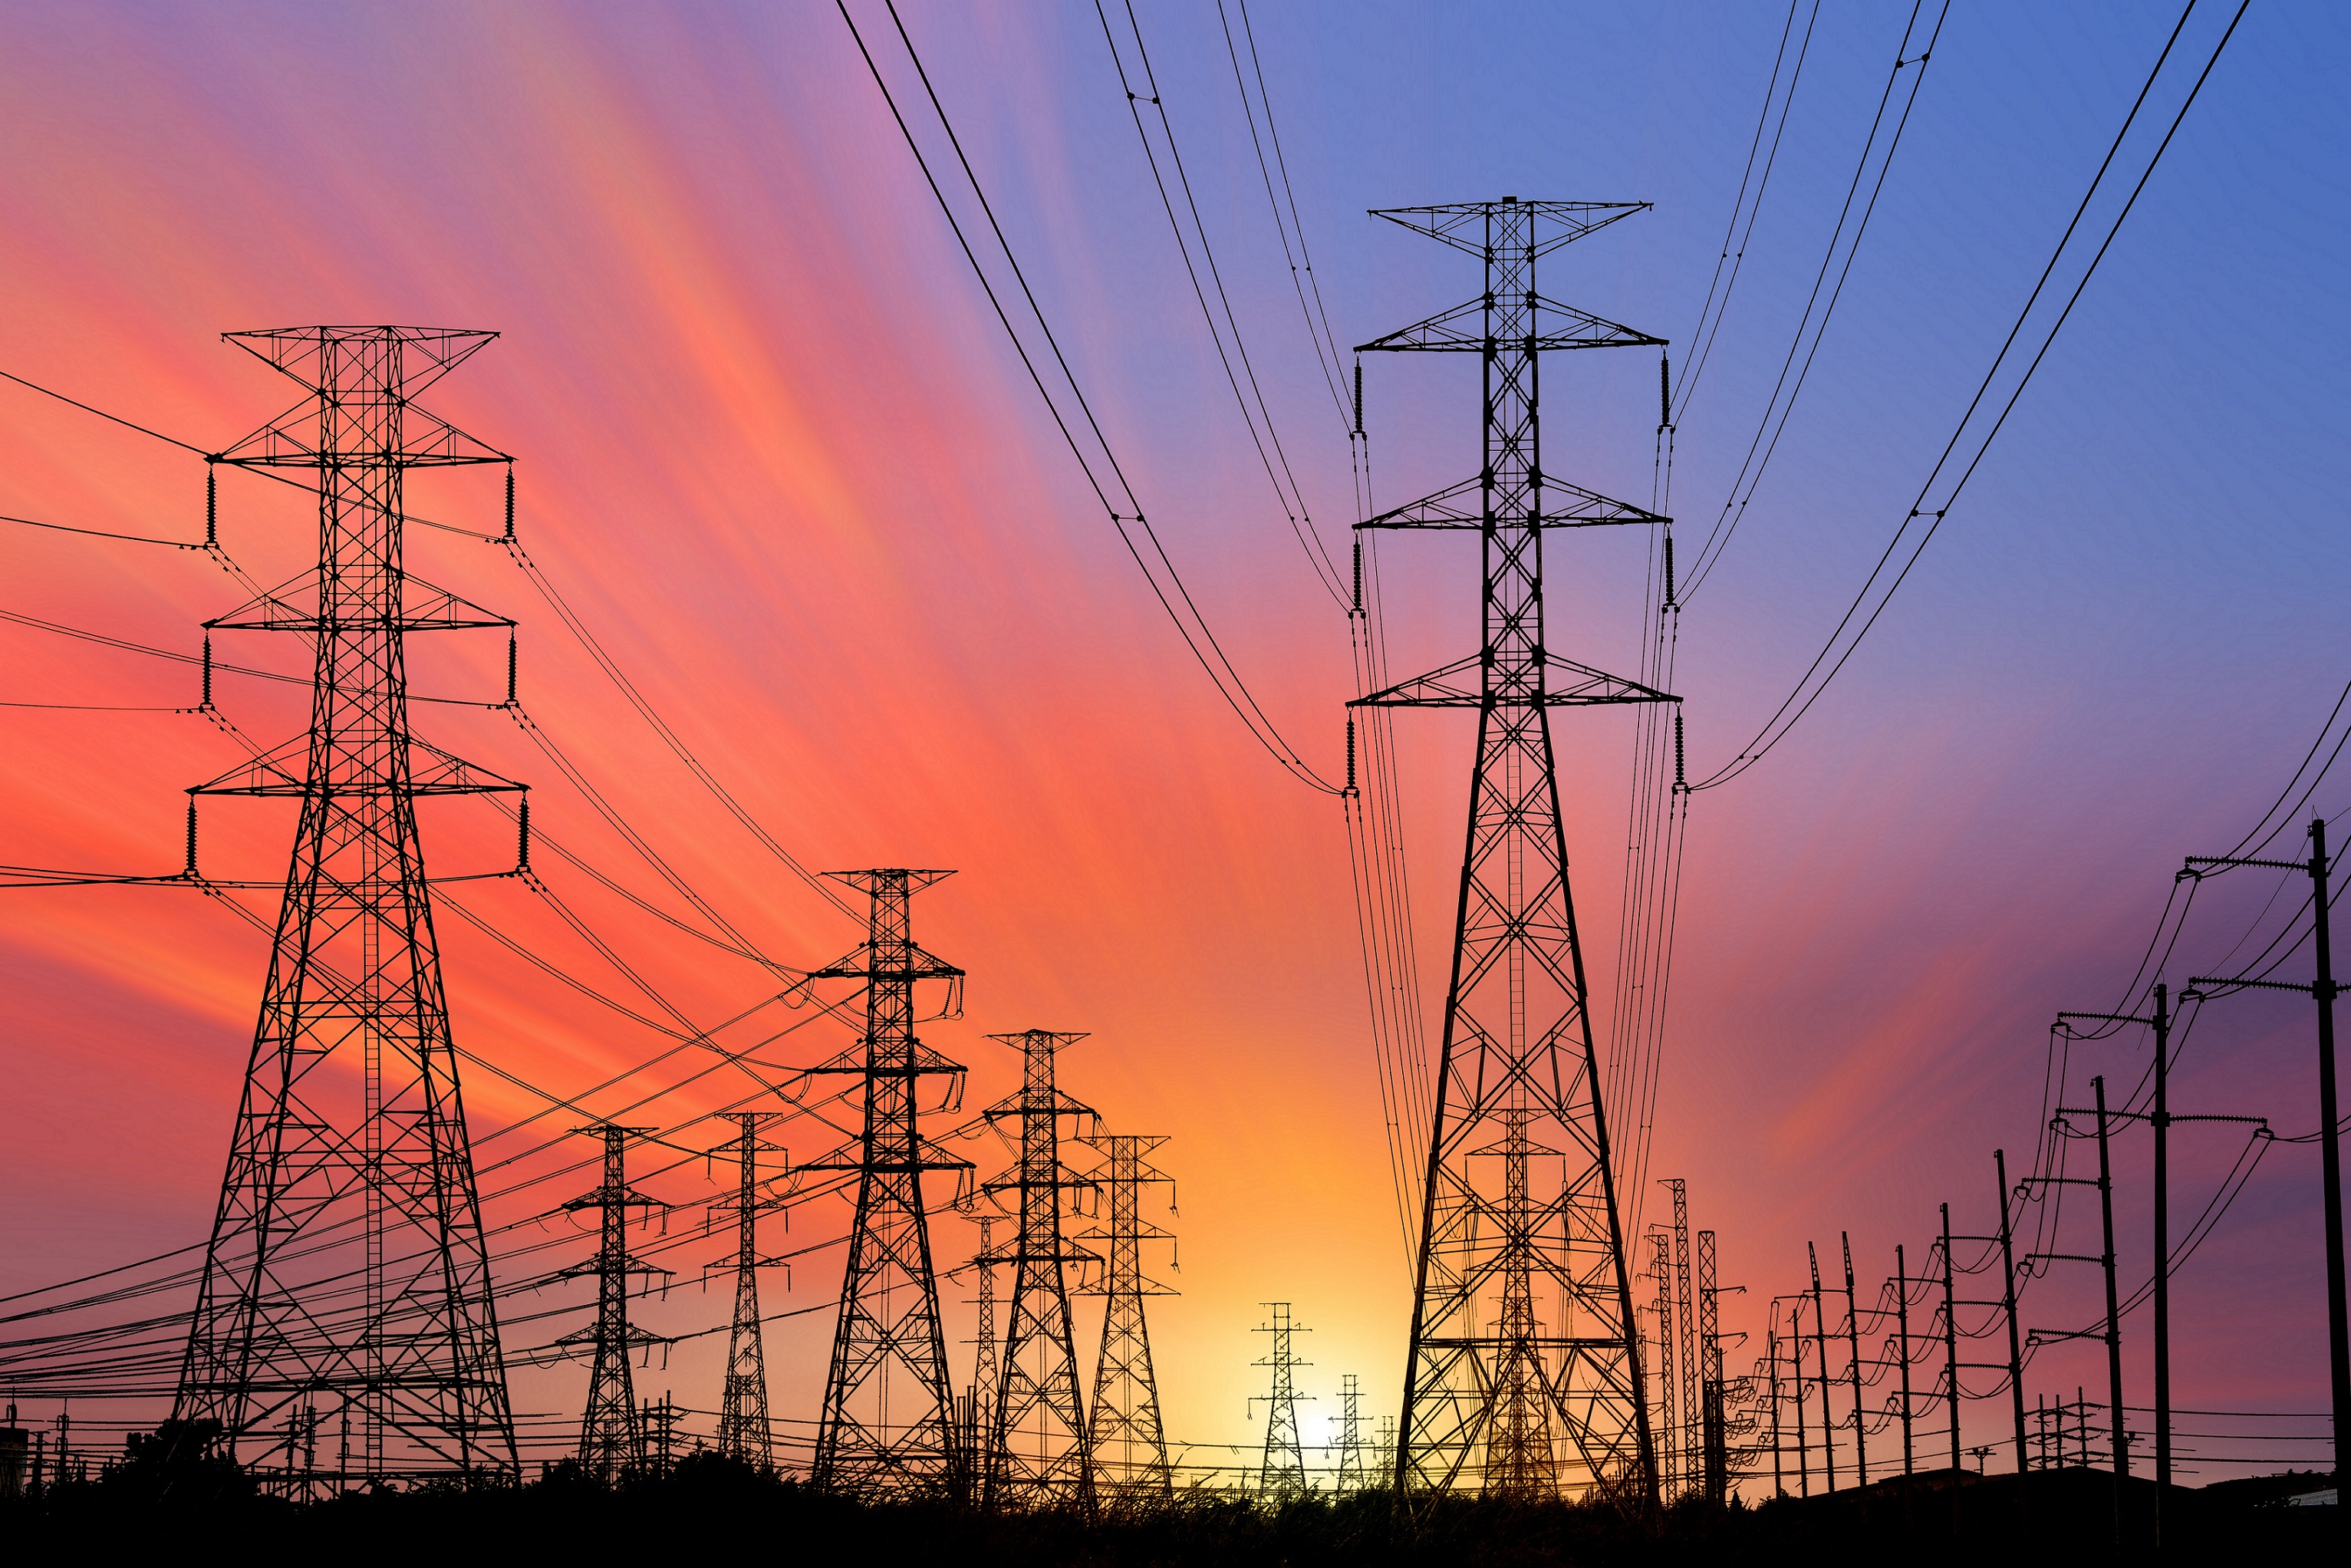 American Power Lines: A Eulogy | Strategic Tech Investor